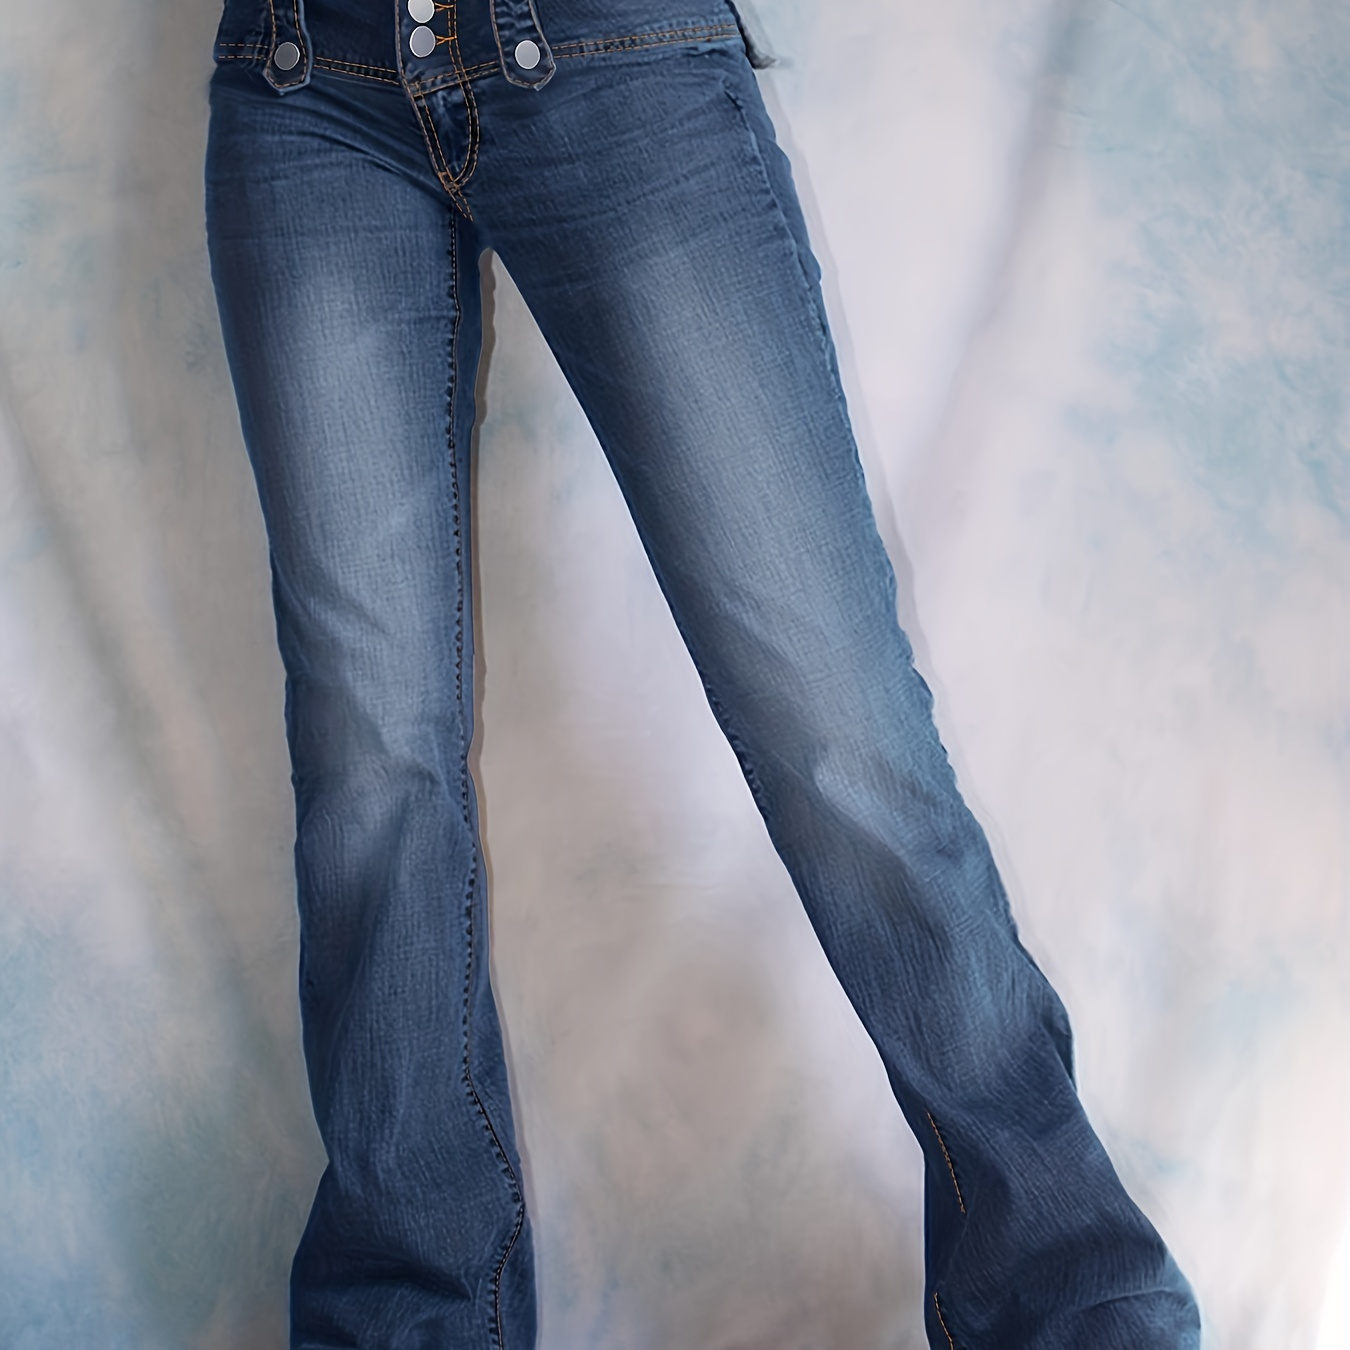 

Blue Single-breasted Button Flared Jeans, High Waist Bell Bottom High Rise Denim Pants, Women's Denim Jeans & Clothing